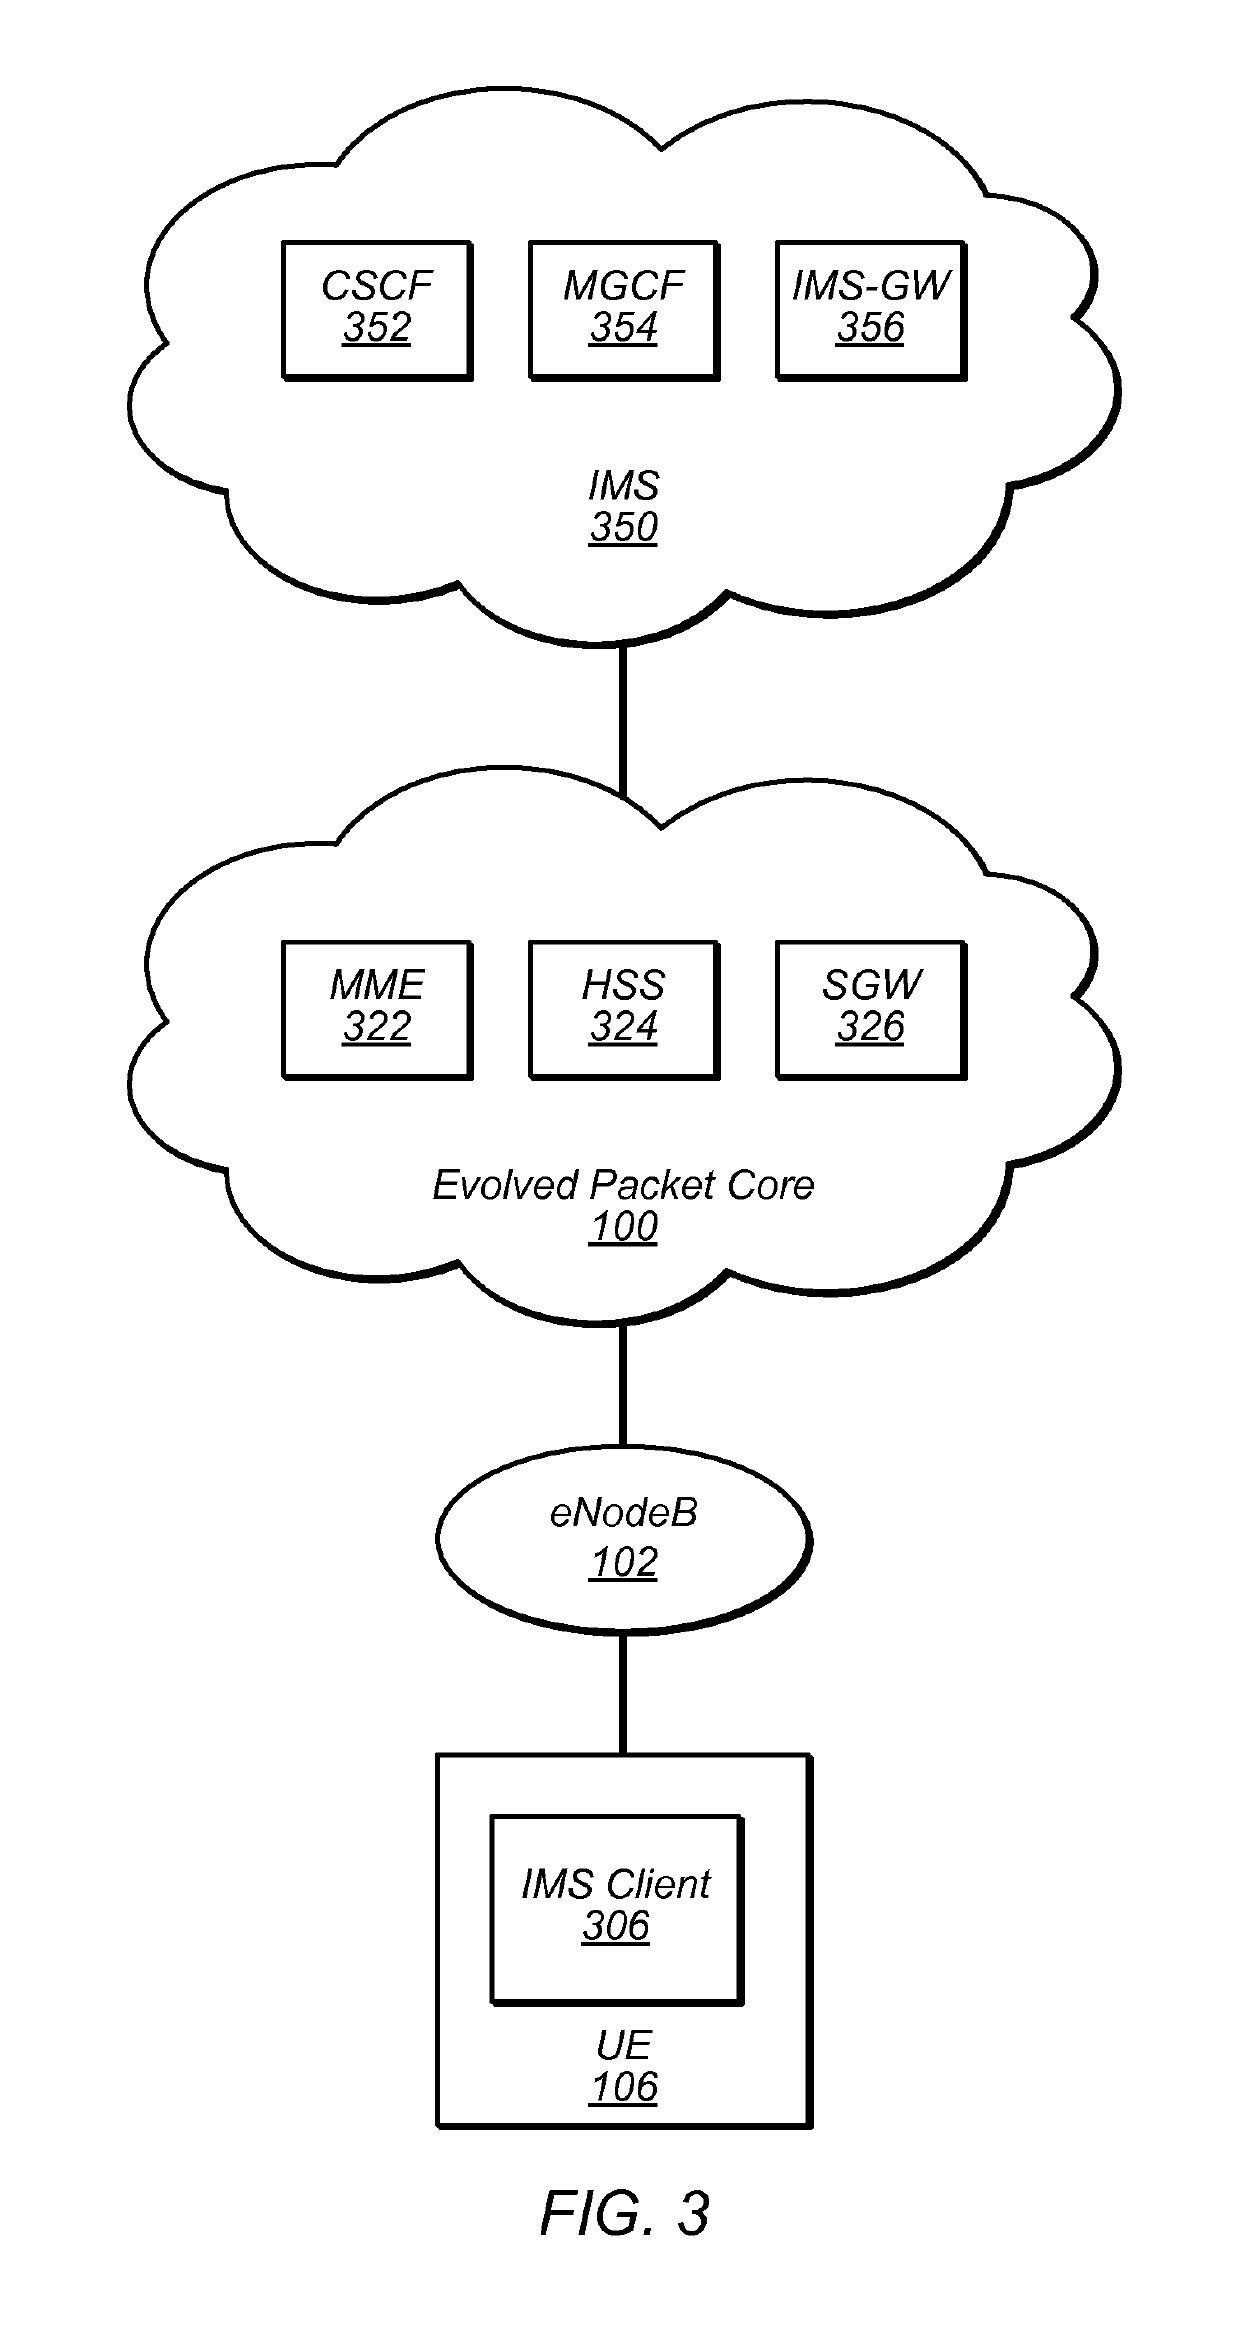 Radio resource management for packet-switched voice communication